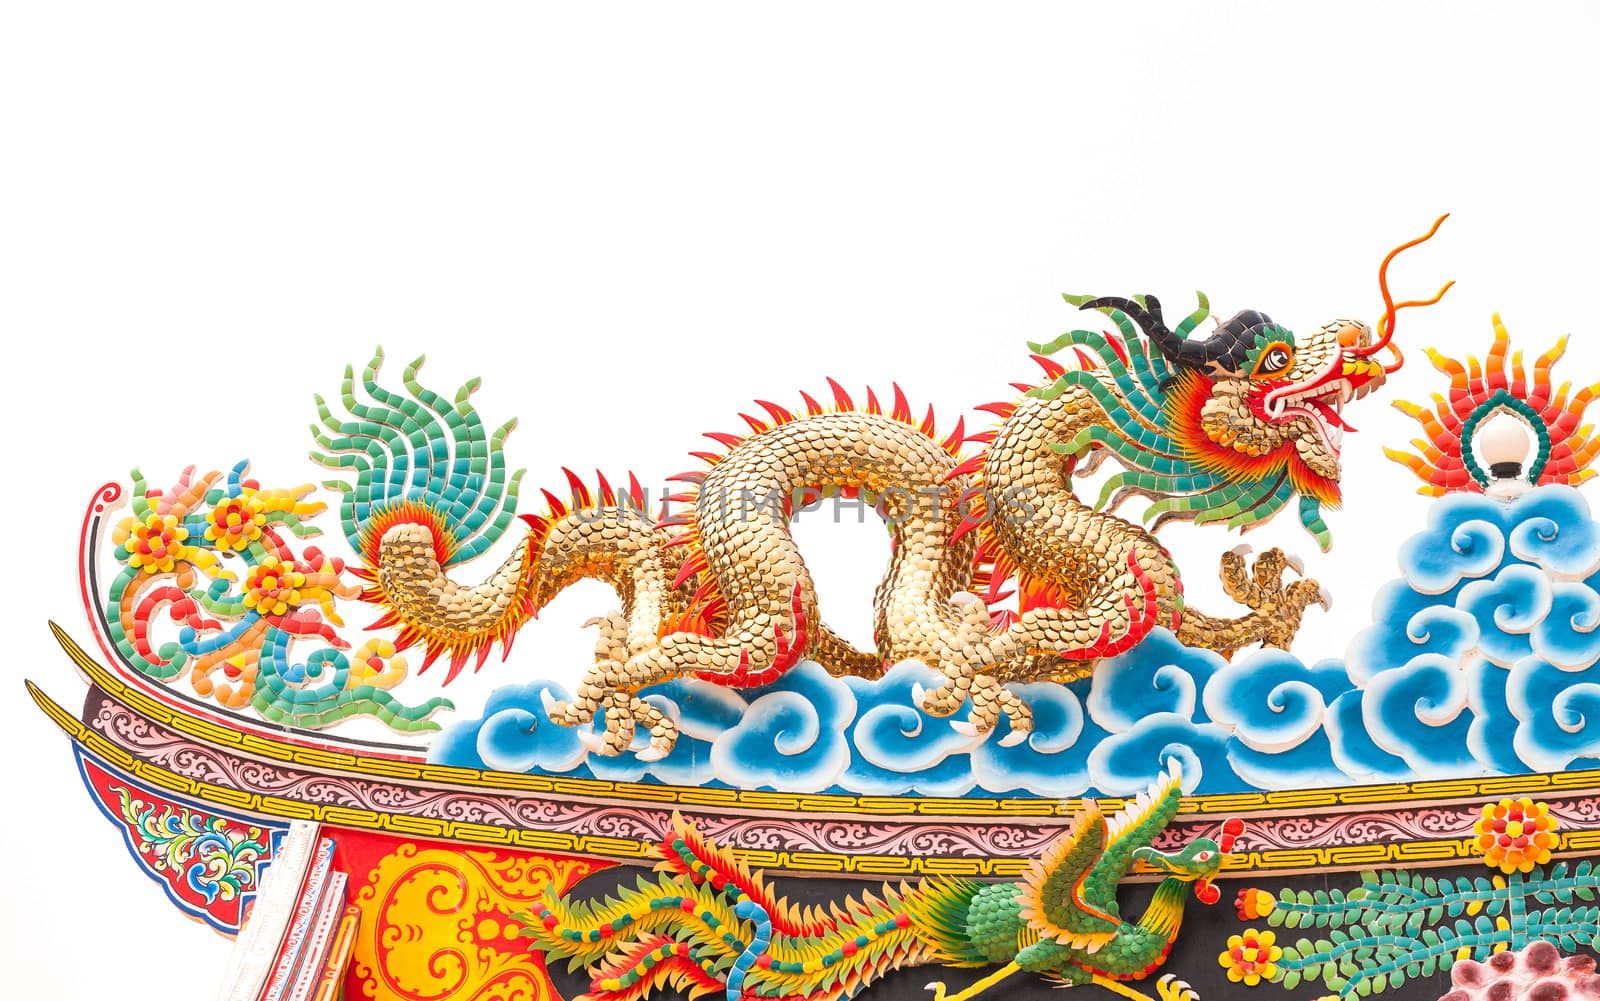 Highly colorful golden dragon in a Chinese temple